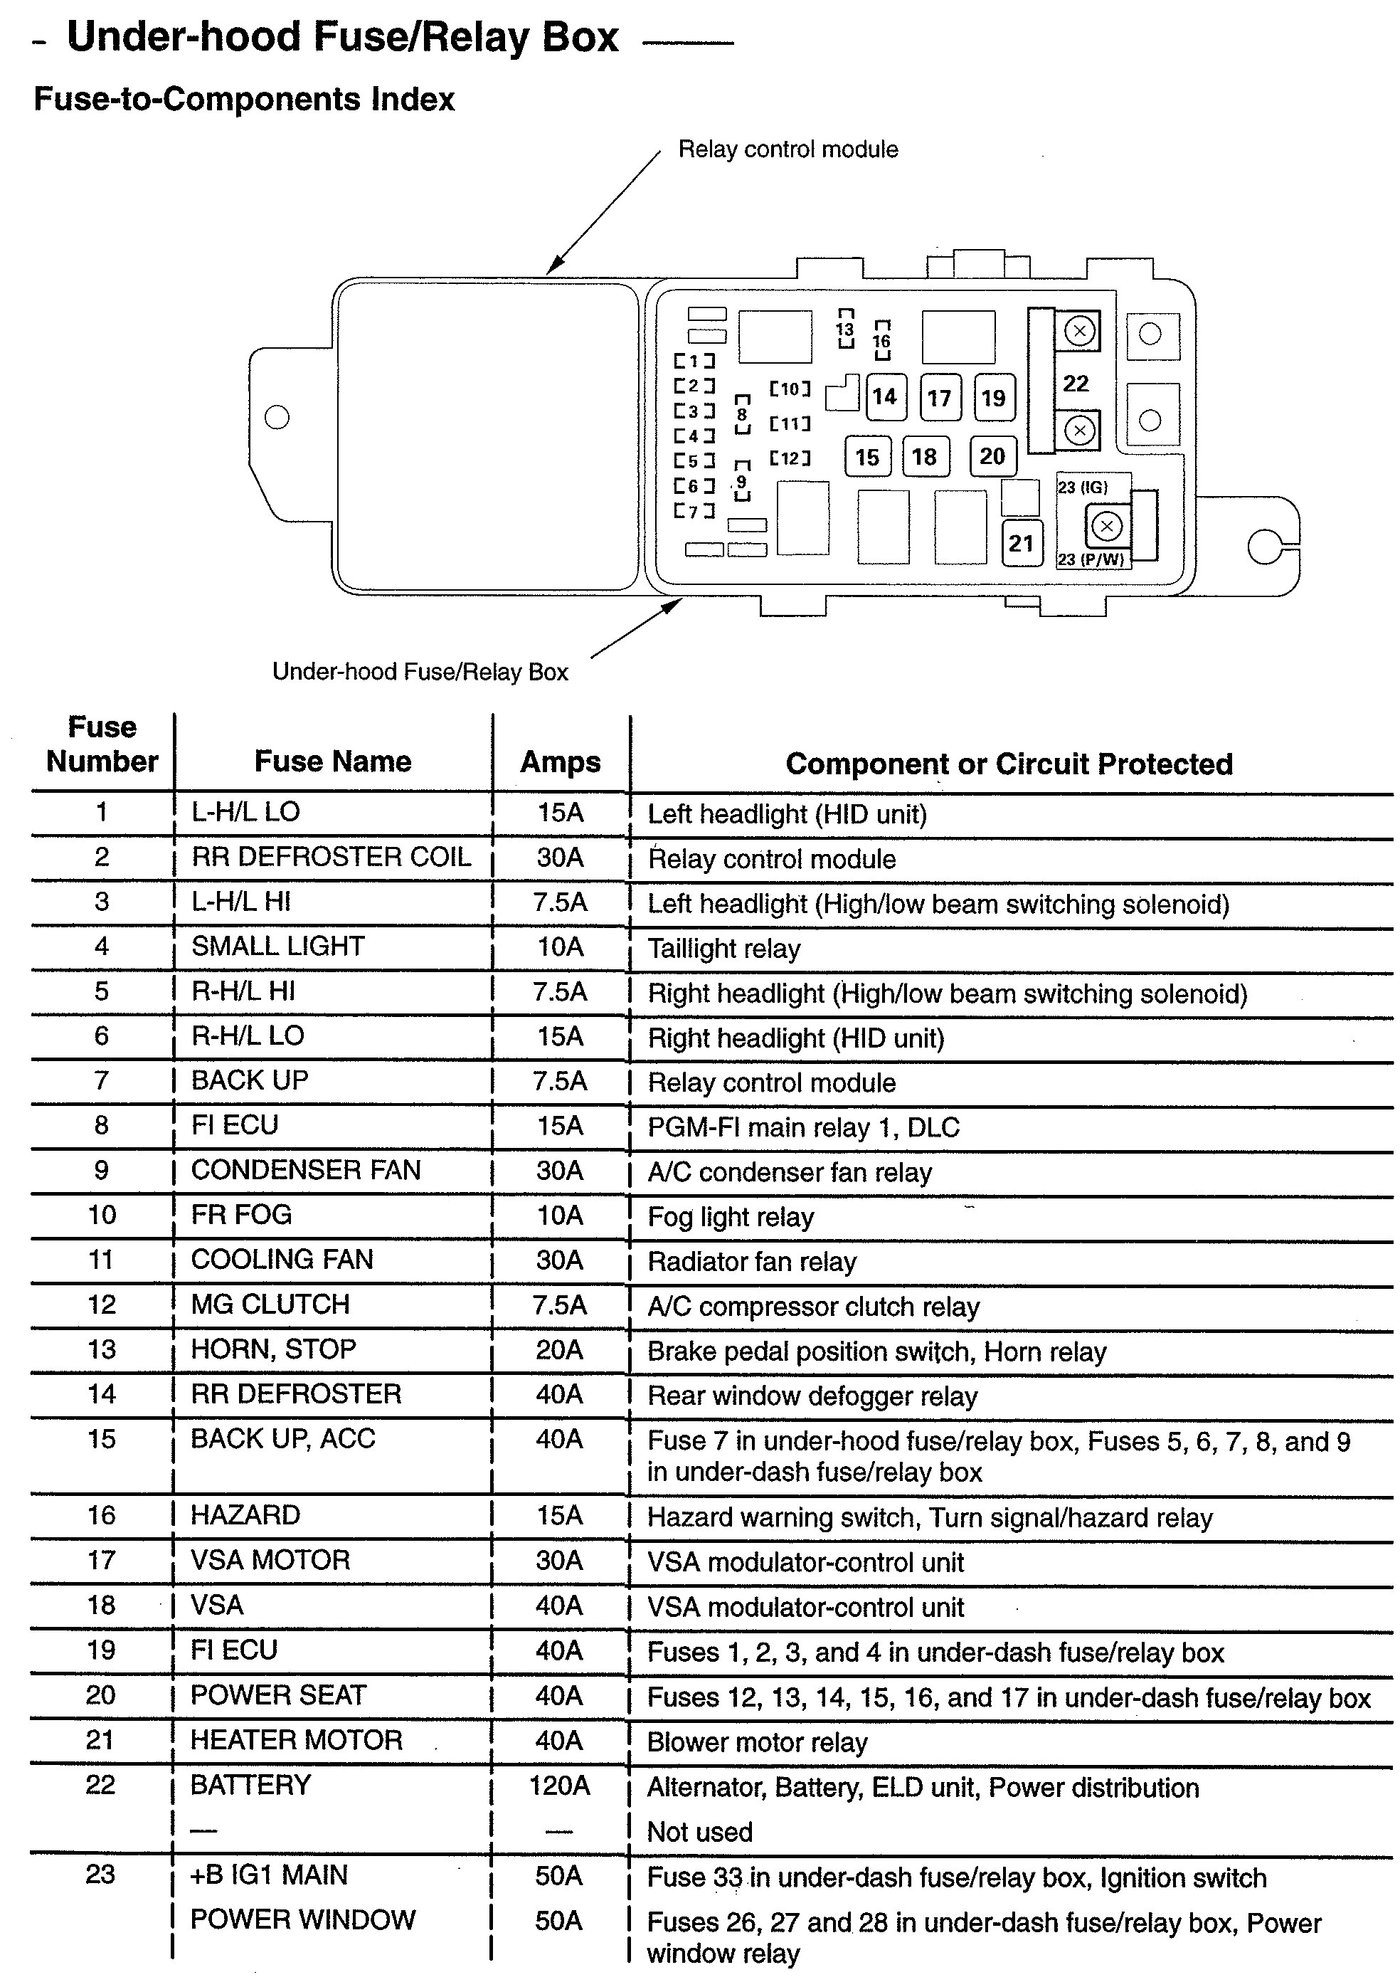 2012 Audi A8 Fuse Box Diagram - Anyone Have The Trunk Fuse ...